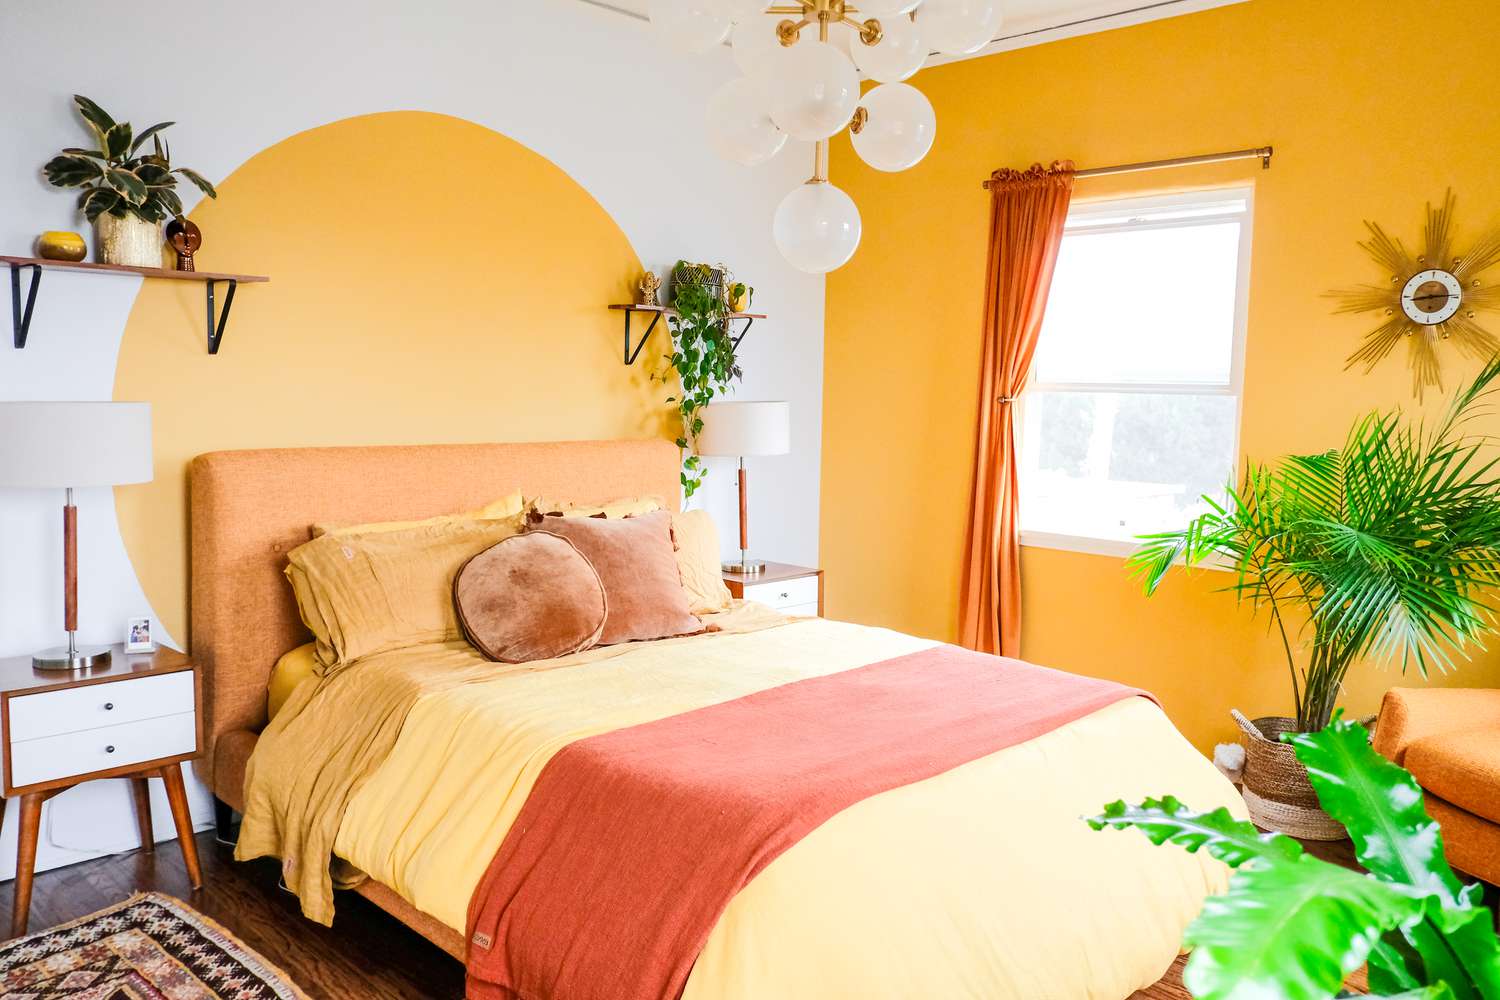 Bright and colorful mid-century modern bedroom design.